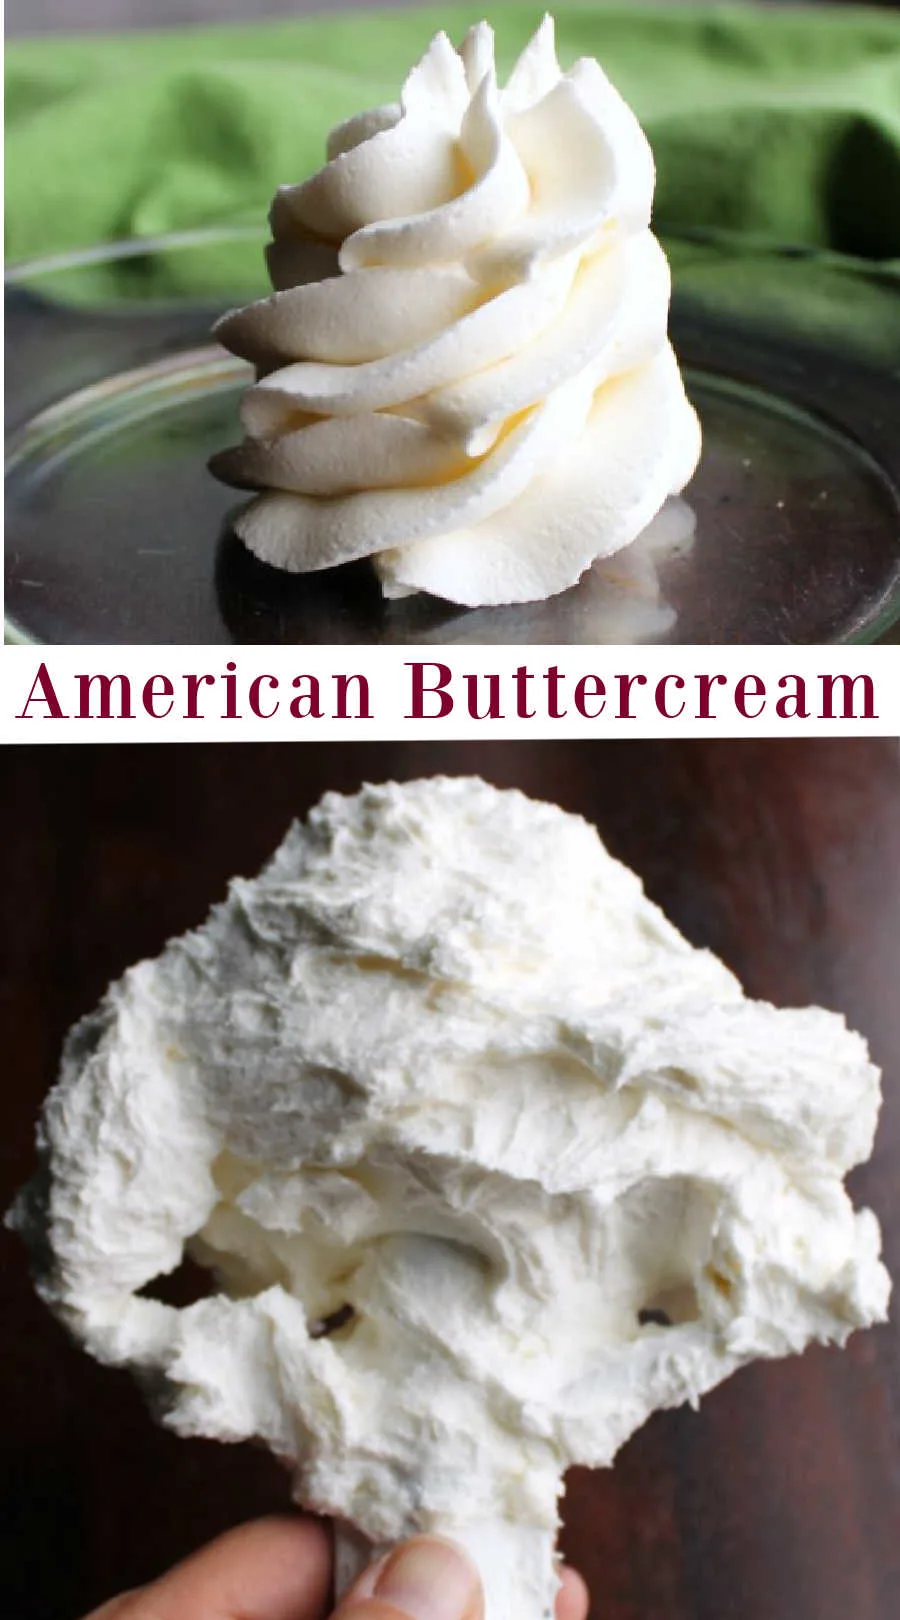 Homemade frosting is super simple to make and tastes so much better than those tubs.  If you are looking for an easy recipe with very few steps and only a handful of ingredients, American buttercream is for you. This frosting is perfect for piping shapes and borders, it spreads over cakes well too.  It is versatile and delicious too!